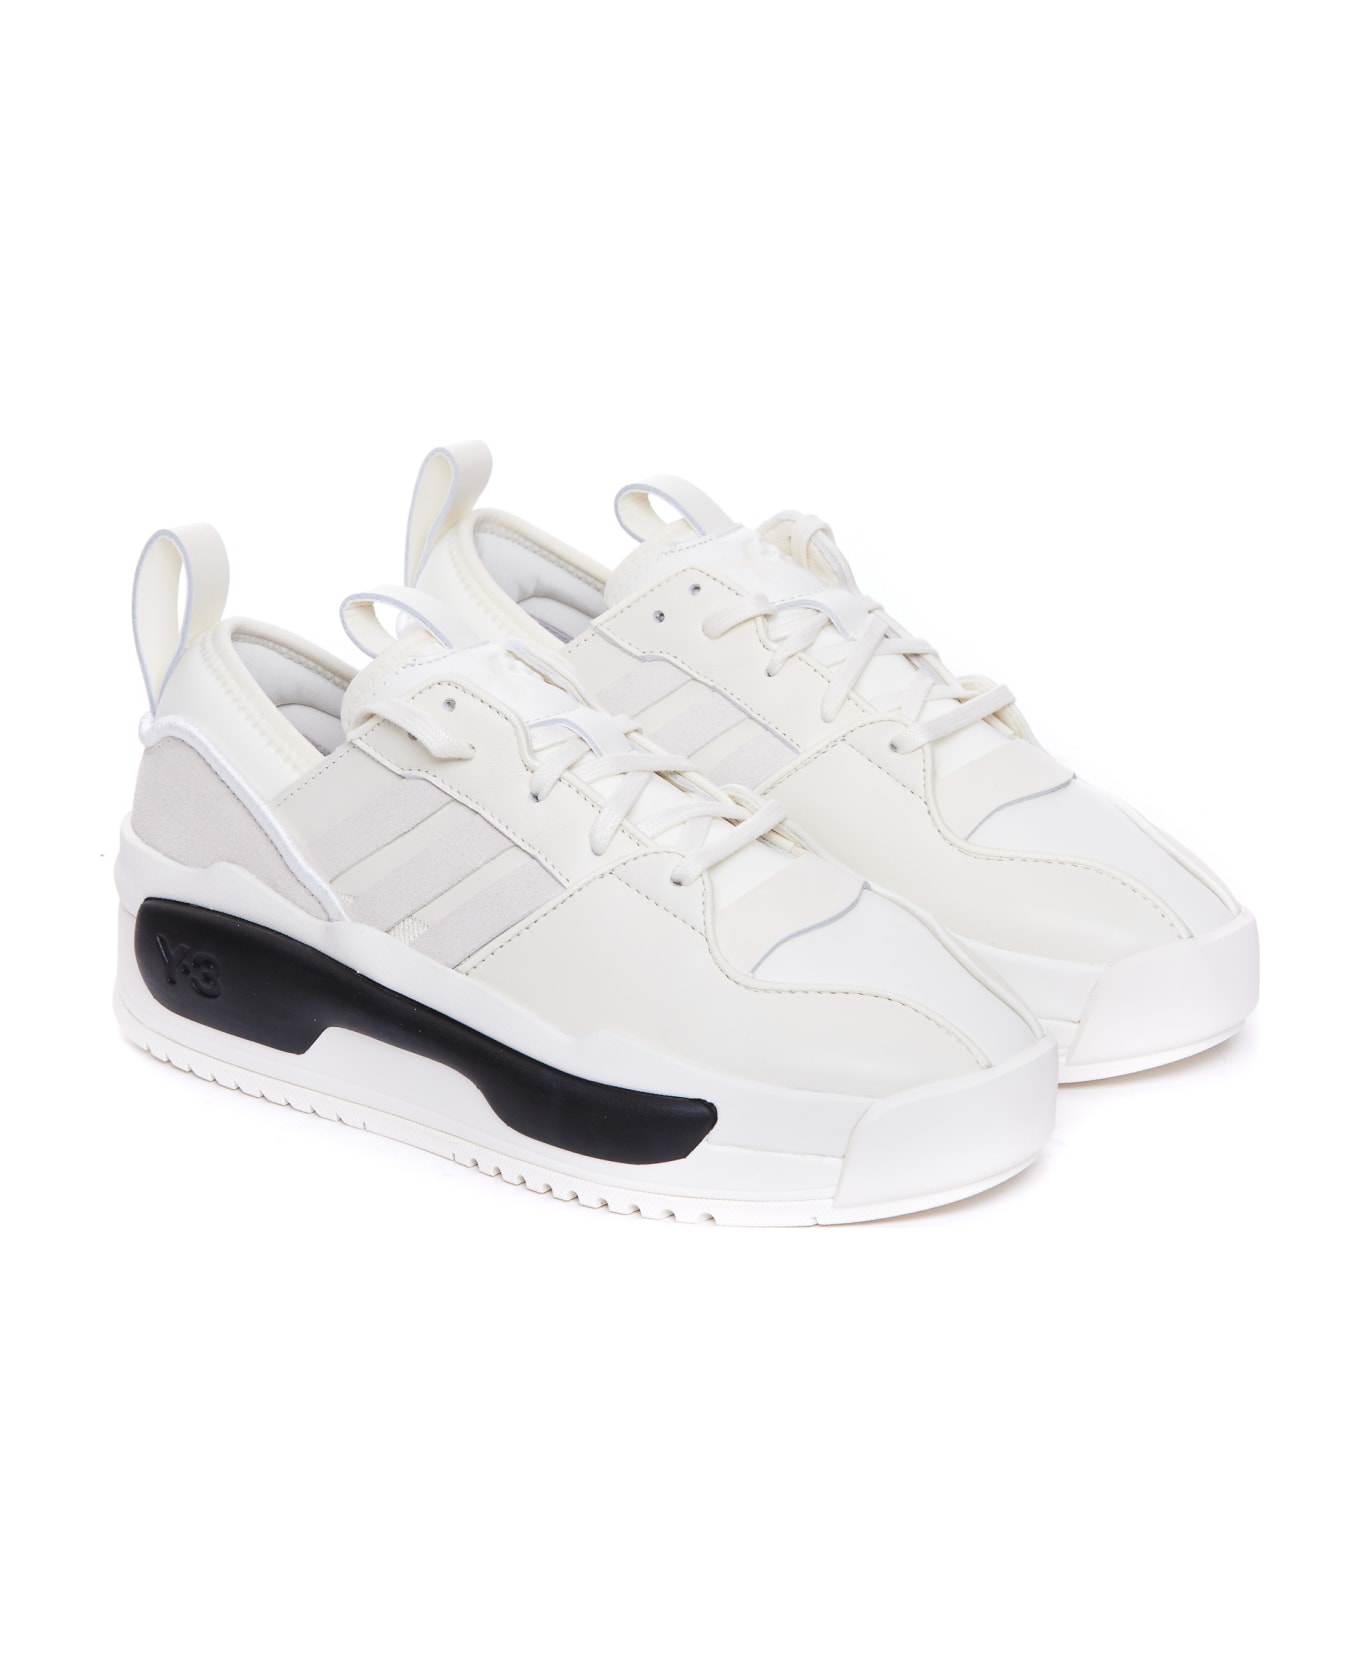 Y-3 Rivalry Sneakers - White